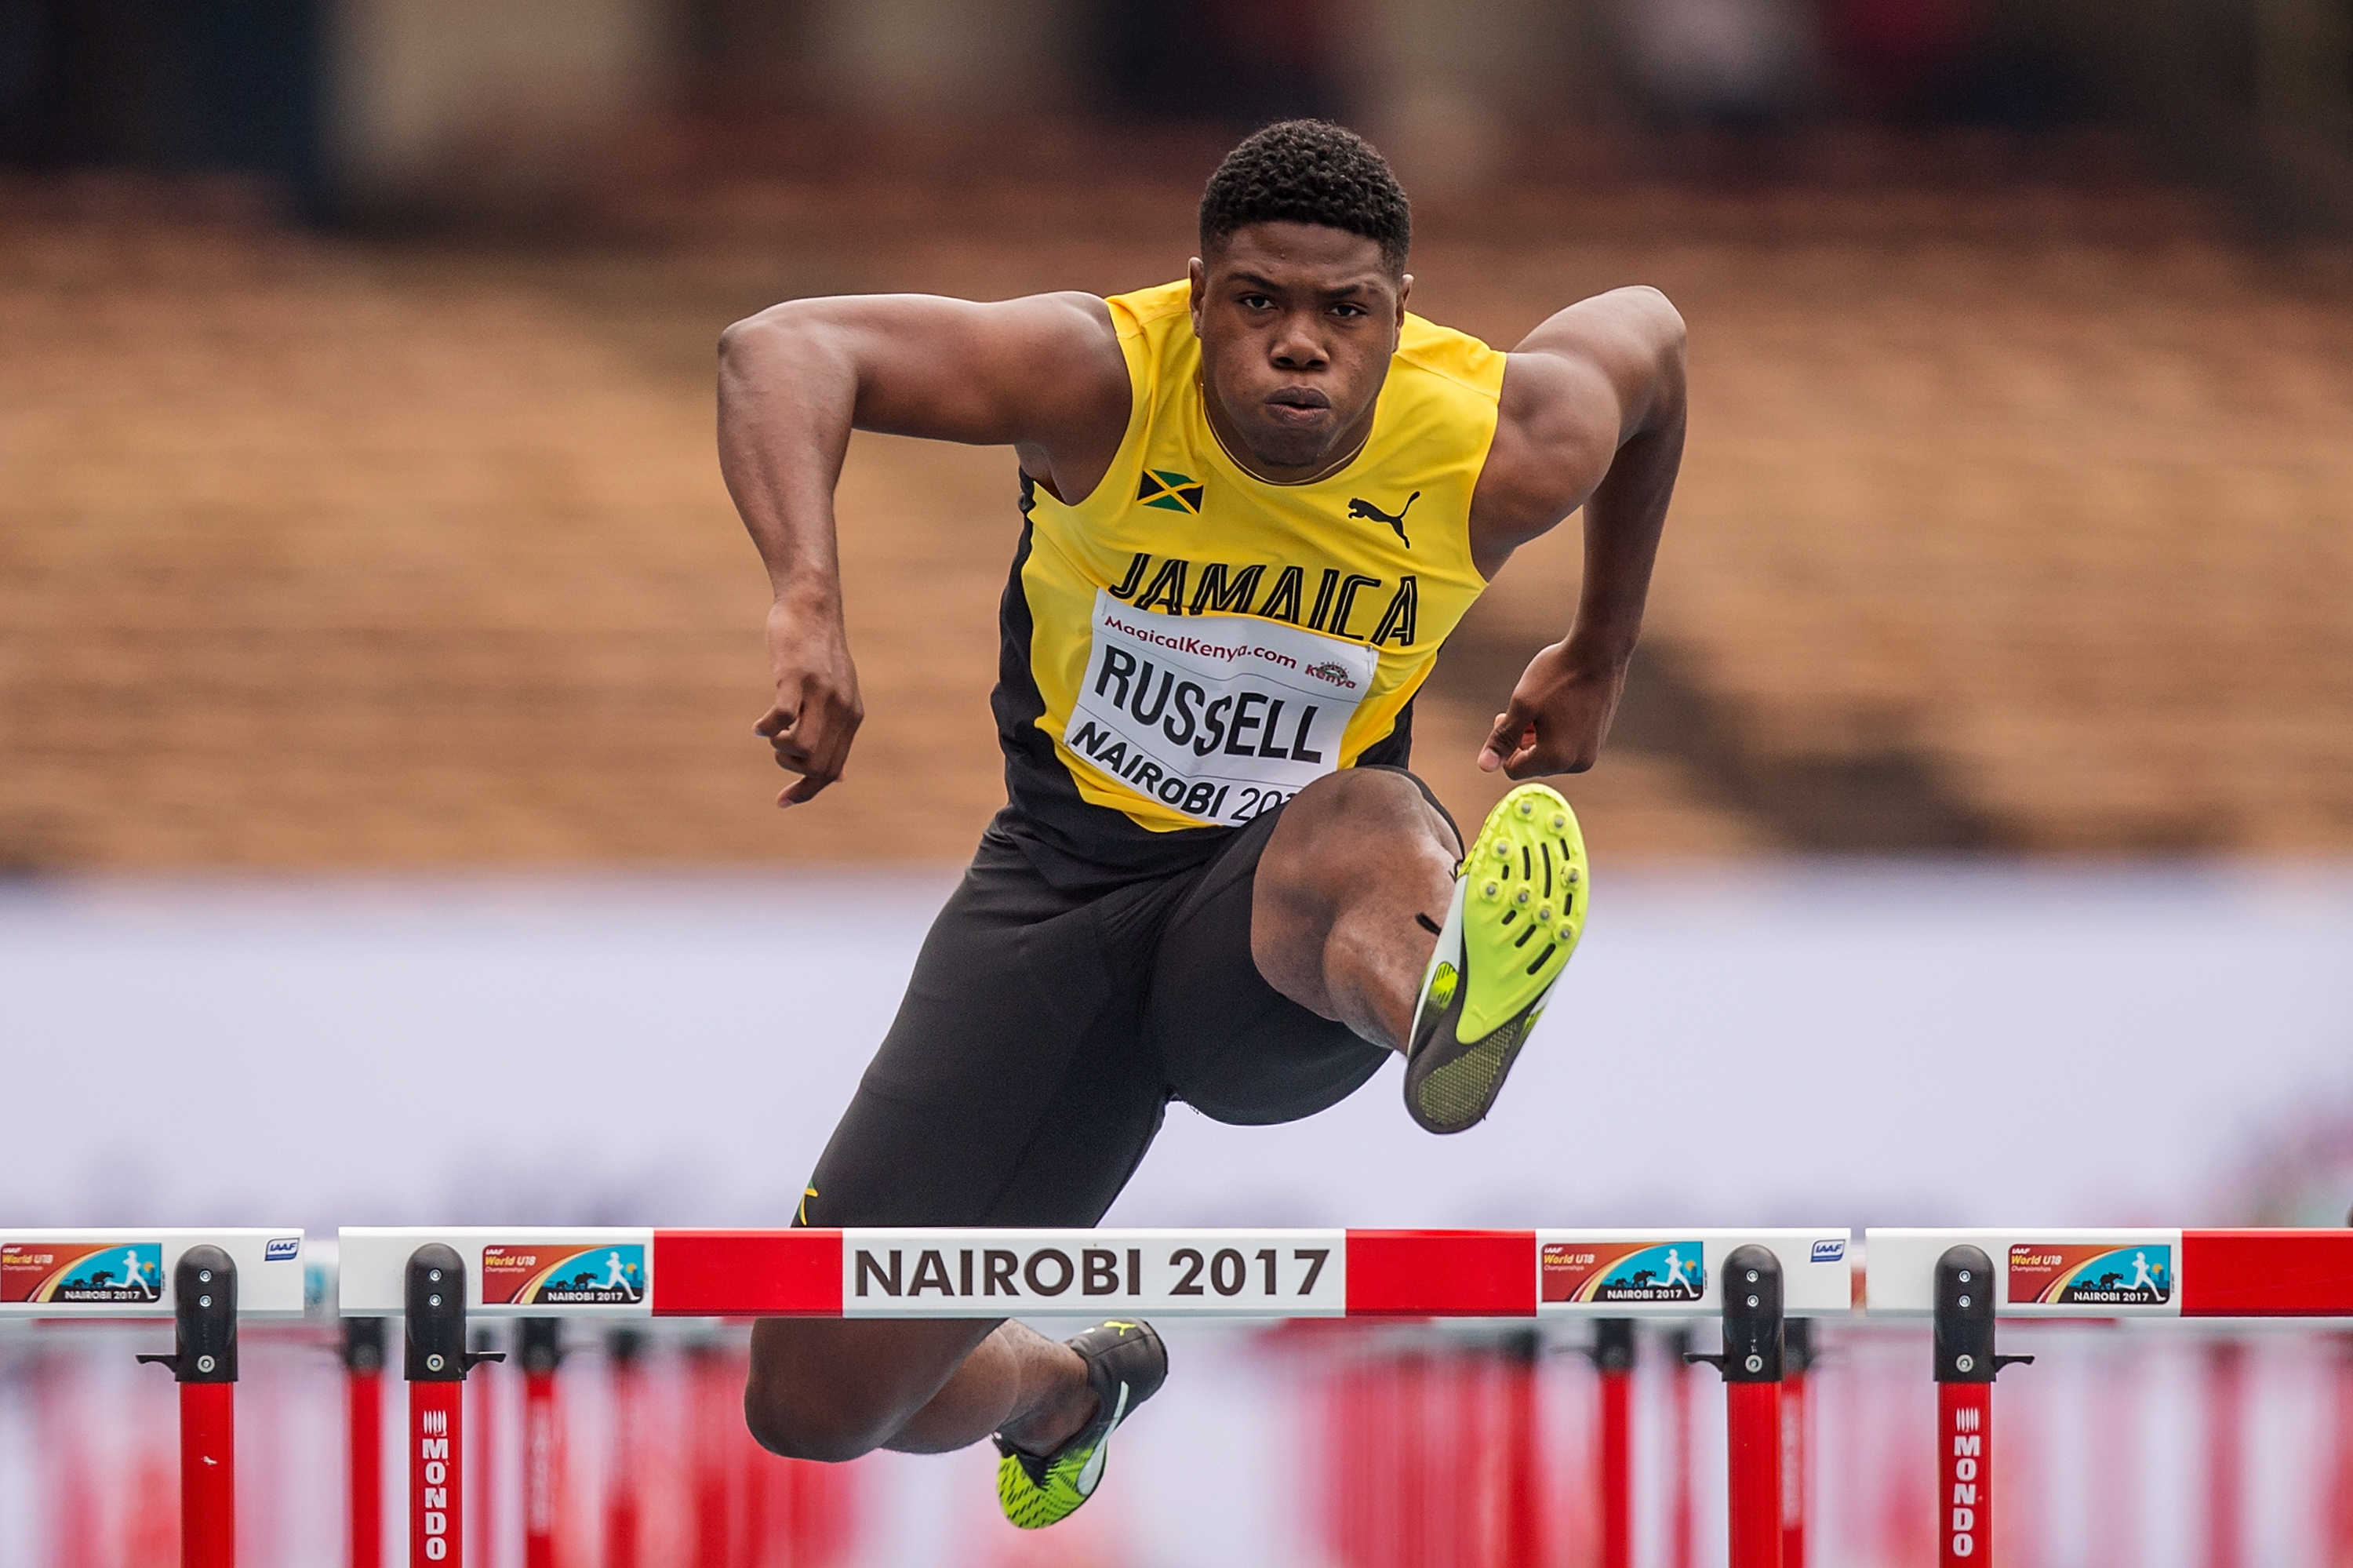 Jamaica ‘removed’ three from London 2017 team